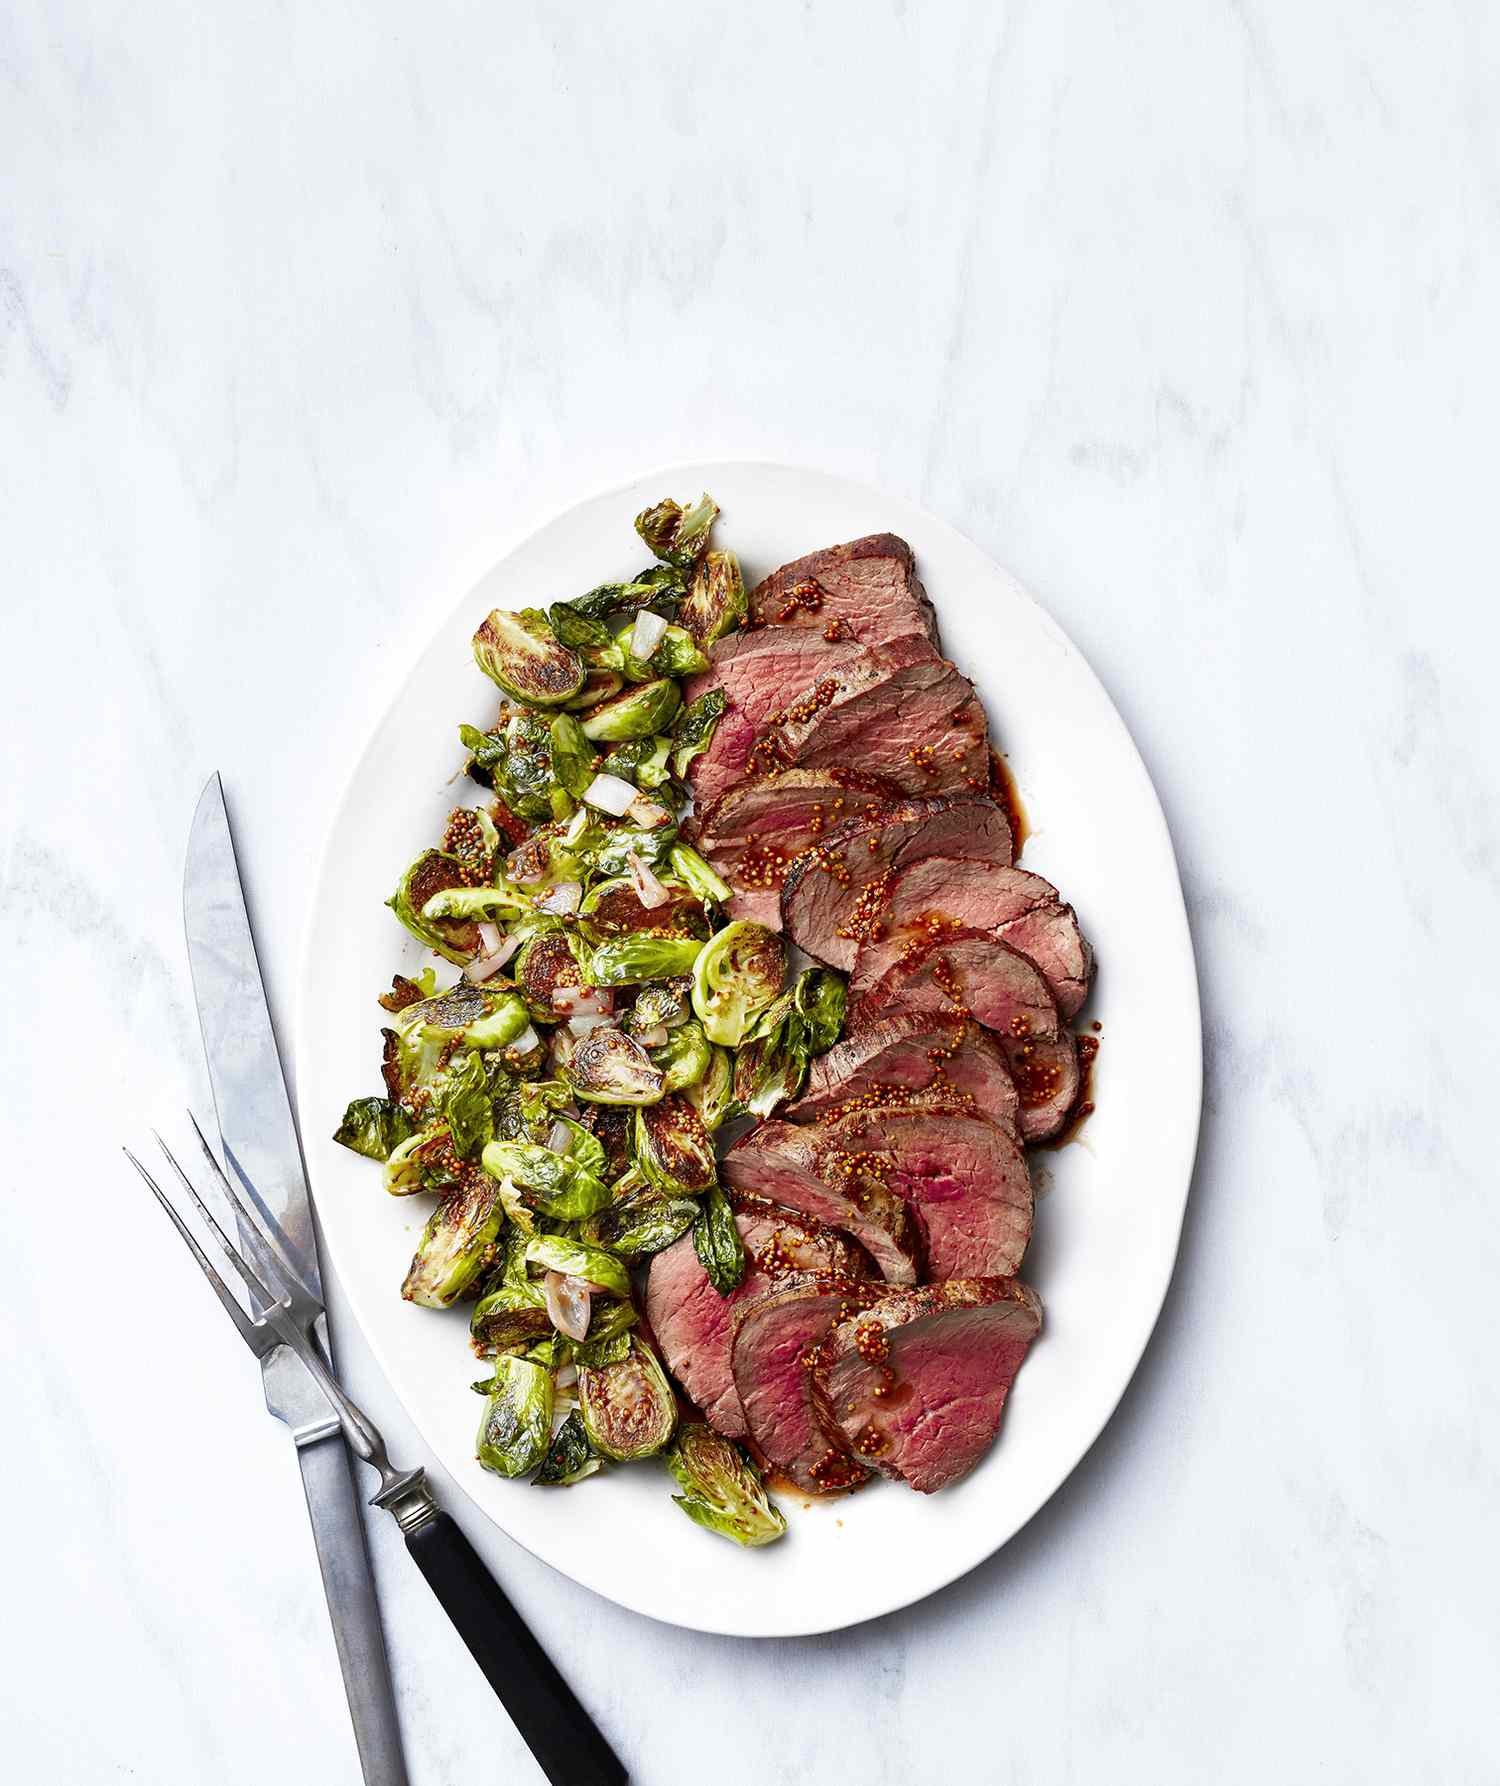 Sheet Pan Beef Tenderloin With Brussels Sprouts and Shallots